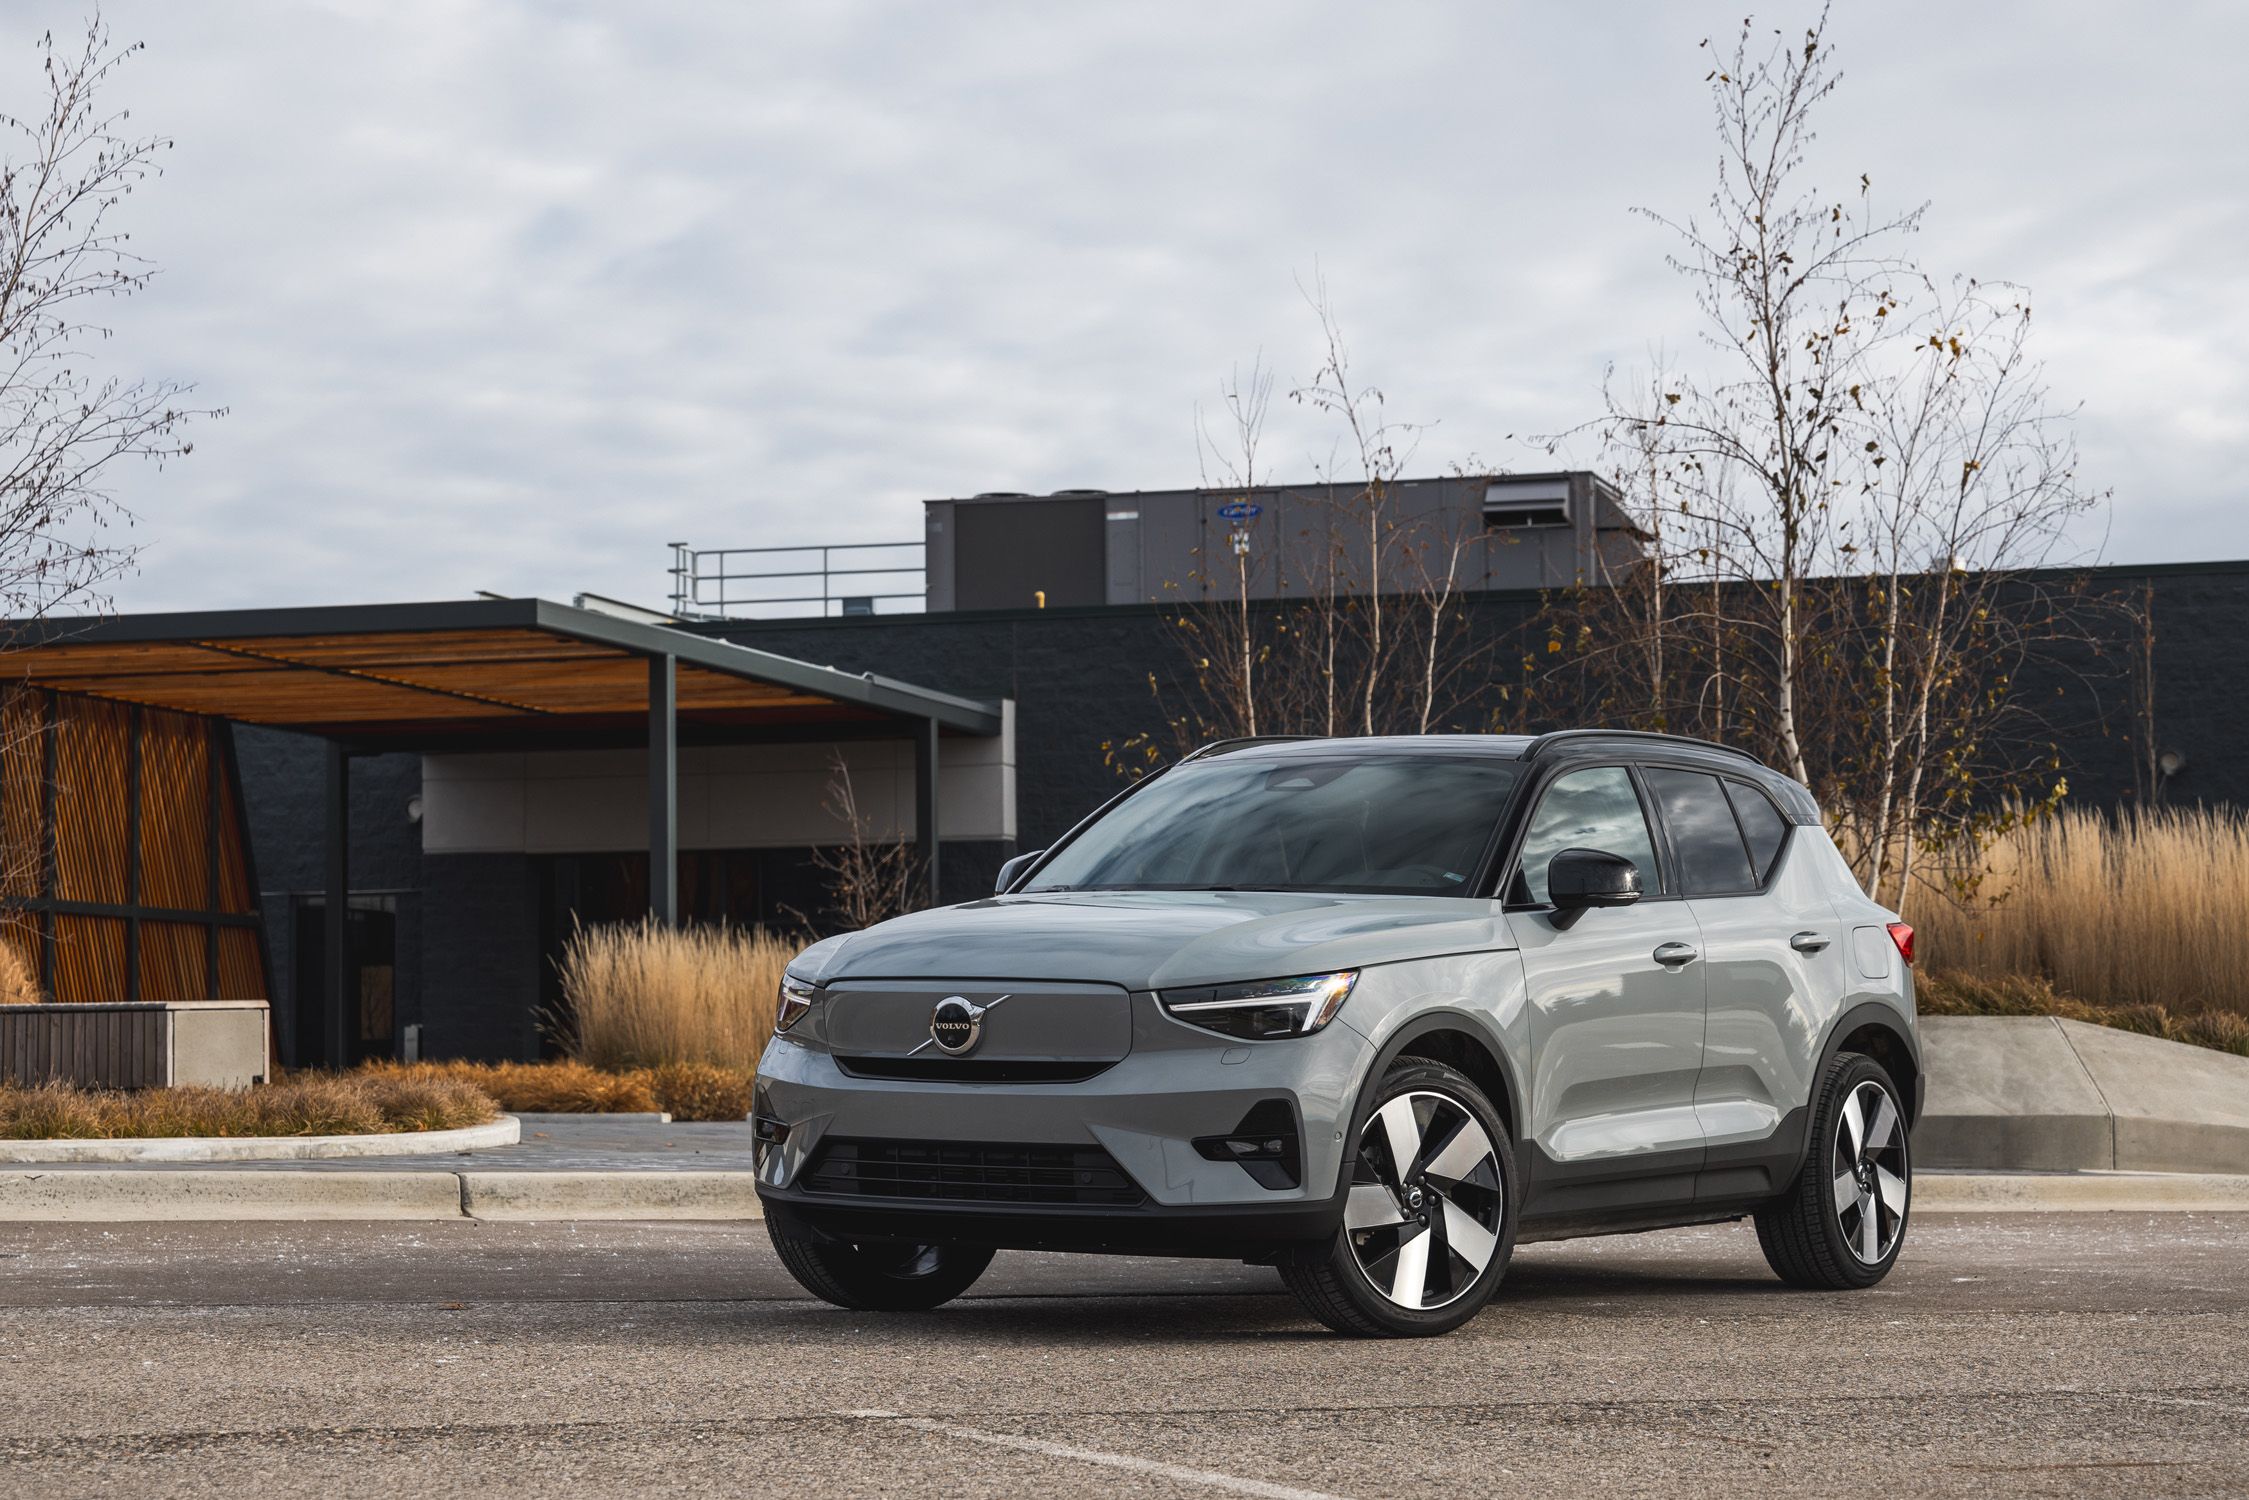 Volvo's First Electric Car Kicks Off a Plan to Cut Emissions